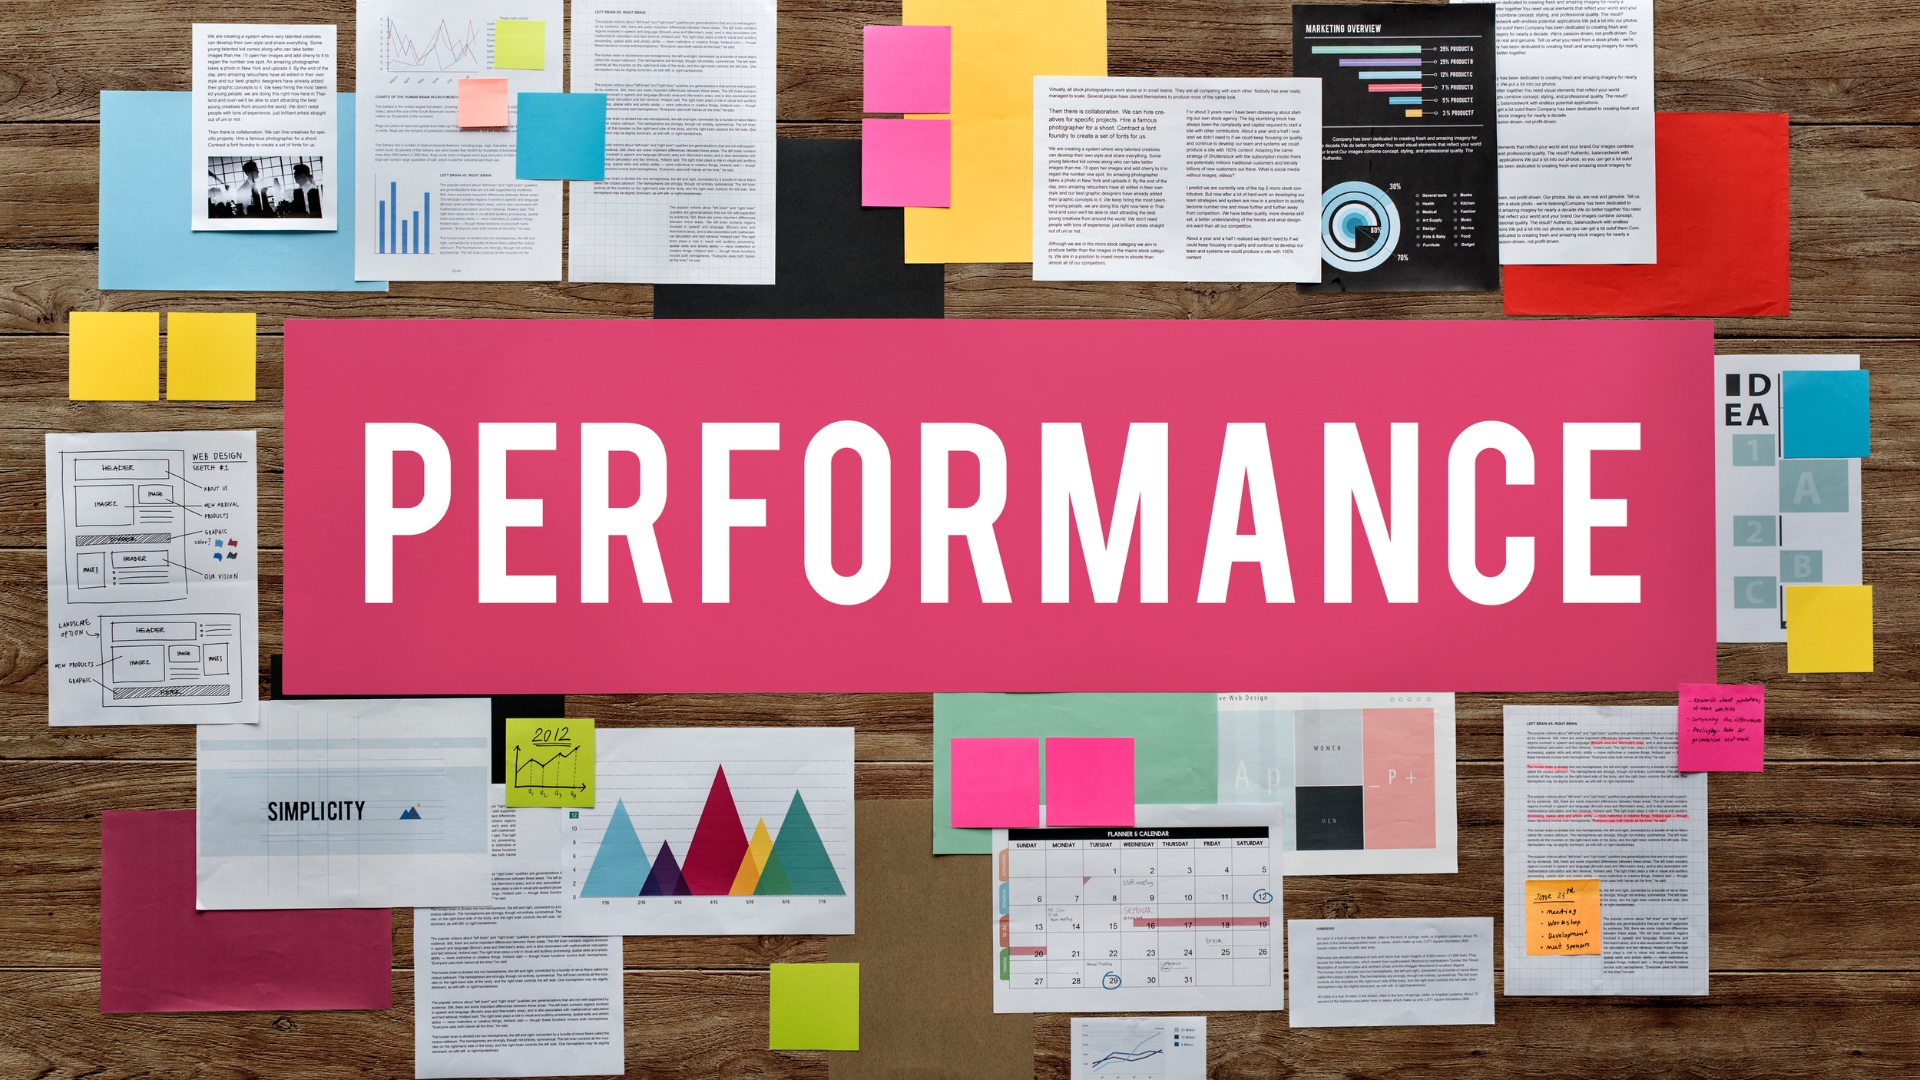 10 Essential Tips to Get a Successful Performance Appraisal